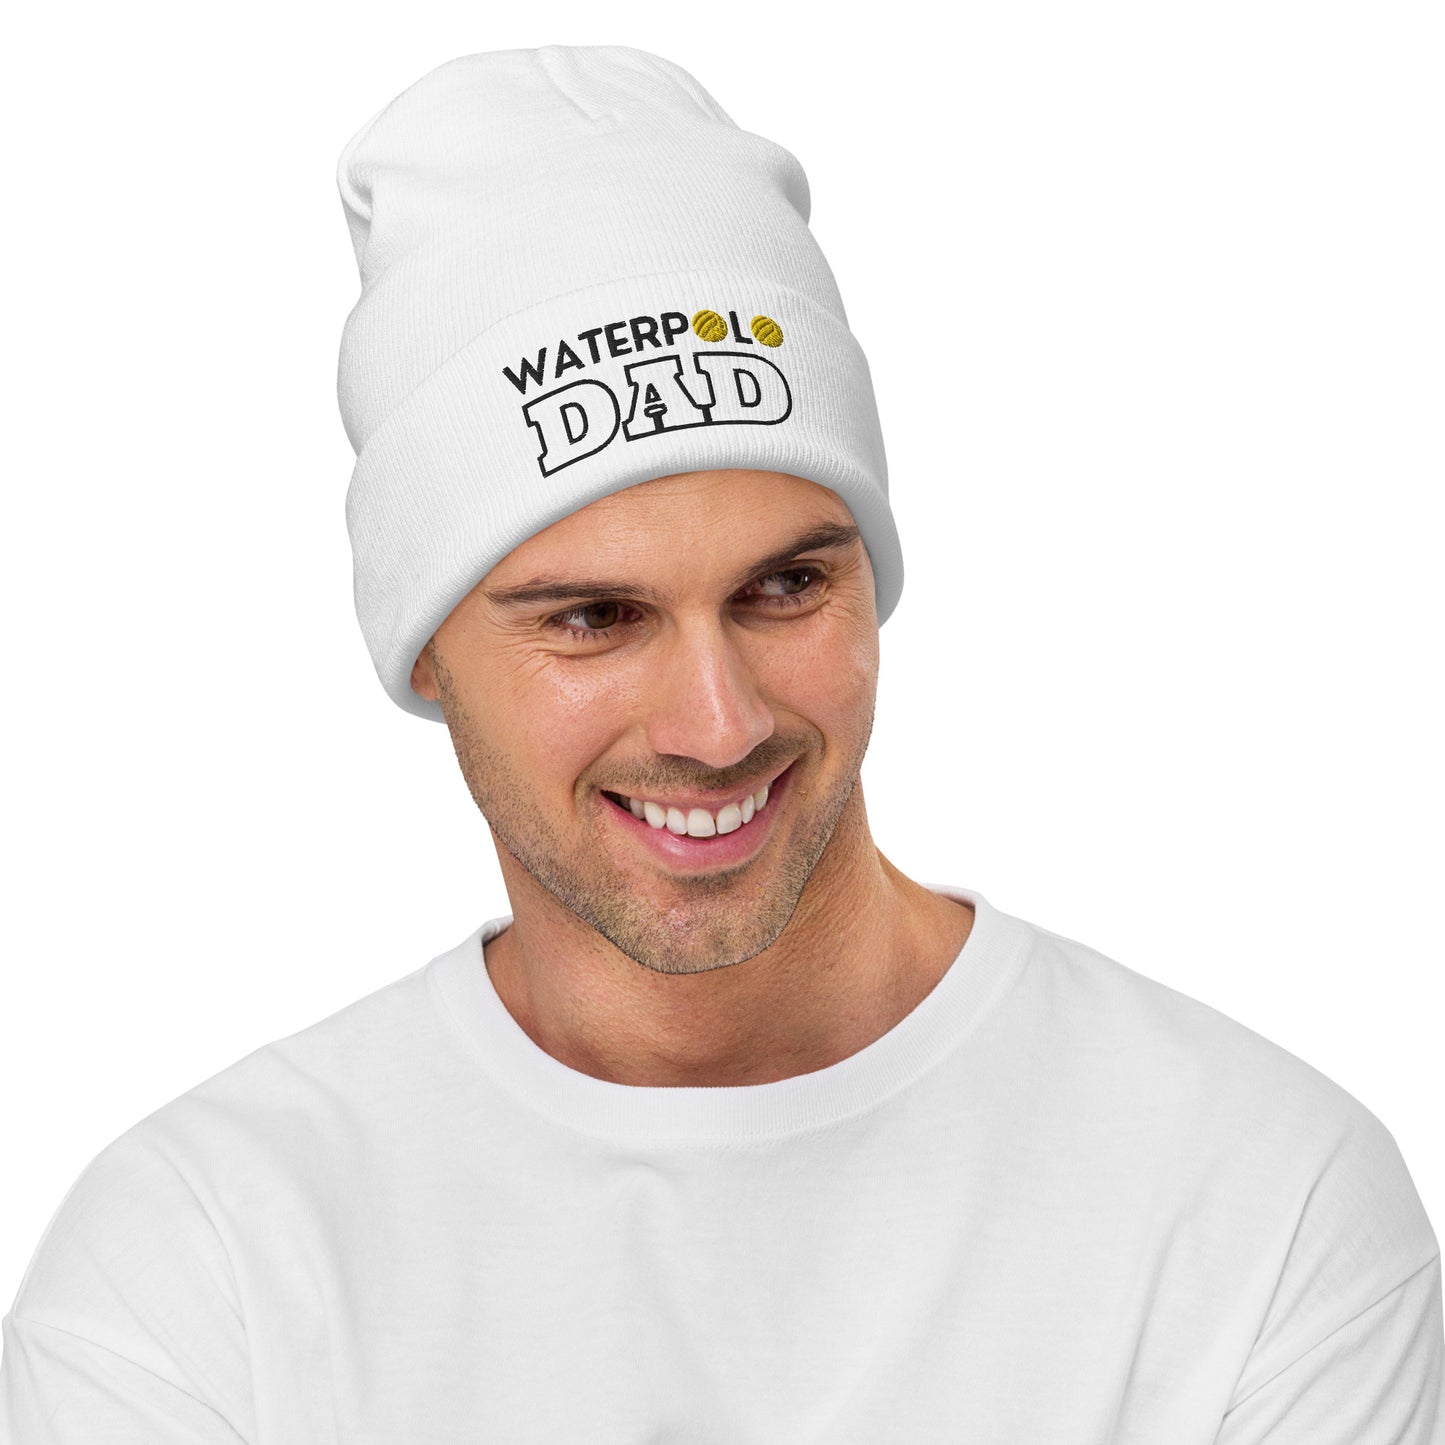 Waterpolo Dad - Embroidered Knit Beanie | Otto Cap 82-480